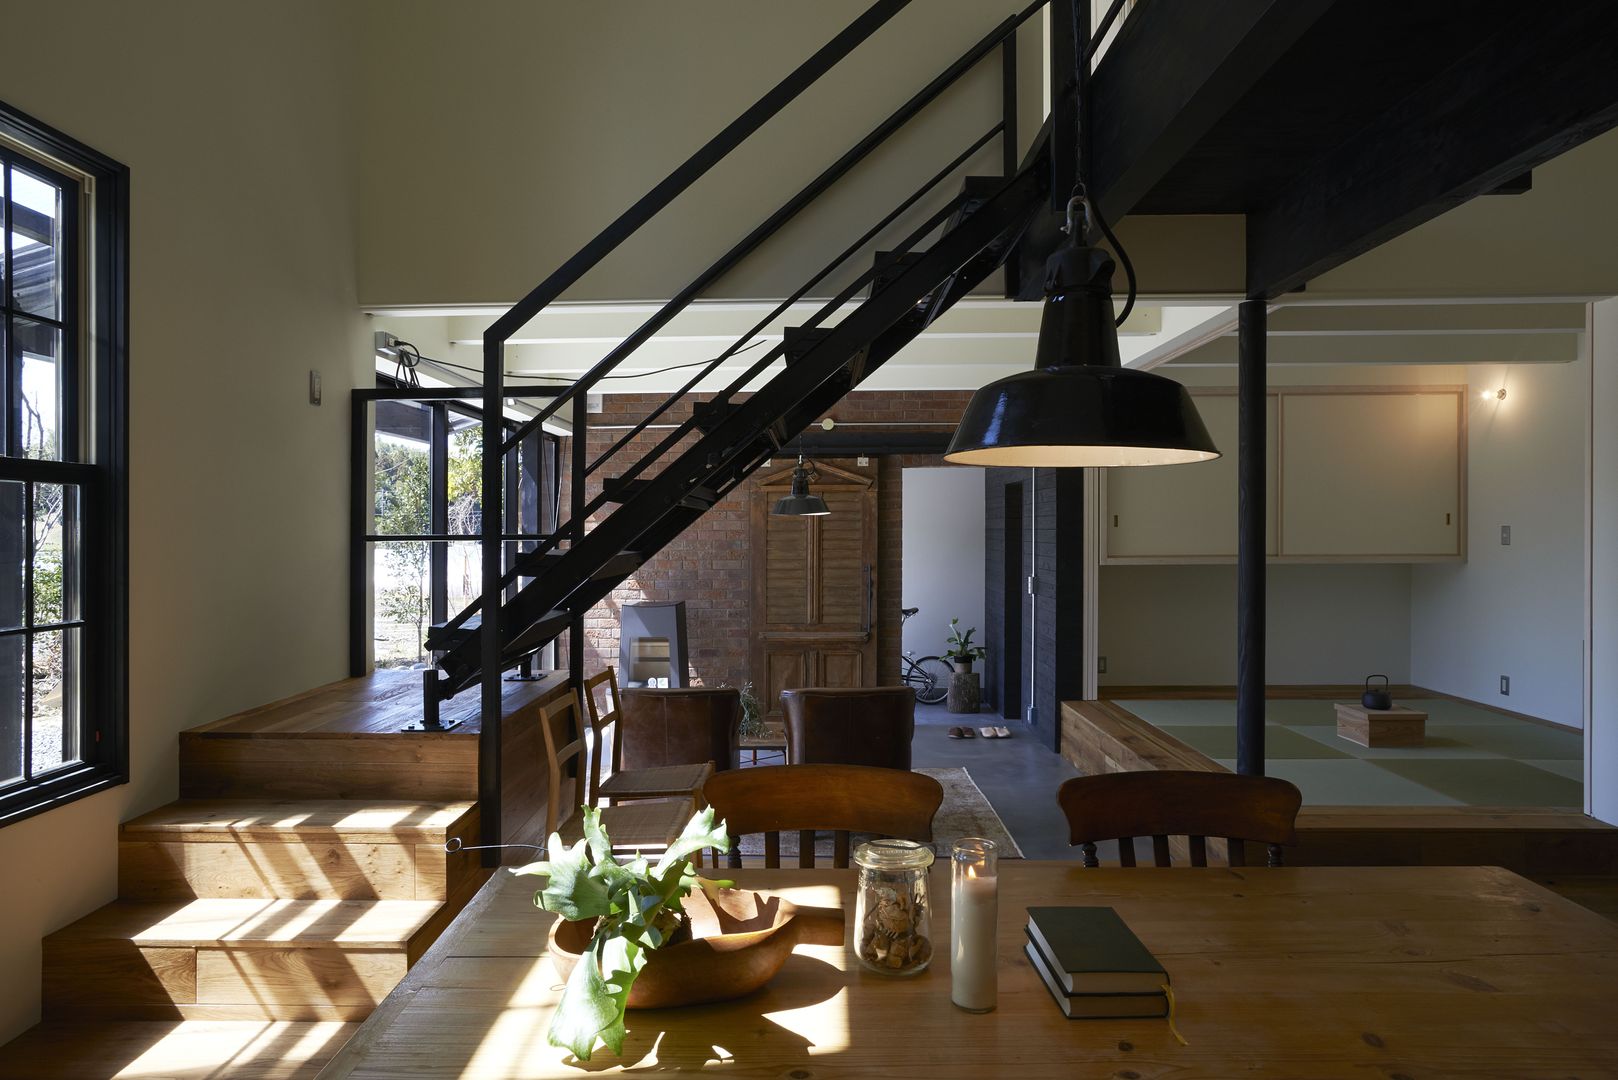 House in Handa, Mimasis Design／ミメイシス デザイン Mimasis Design／ミメイシス デザイン Industrial style dining room